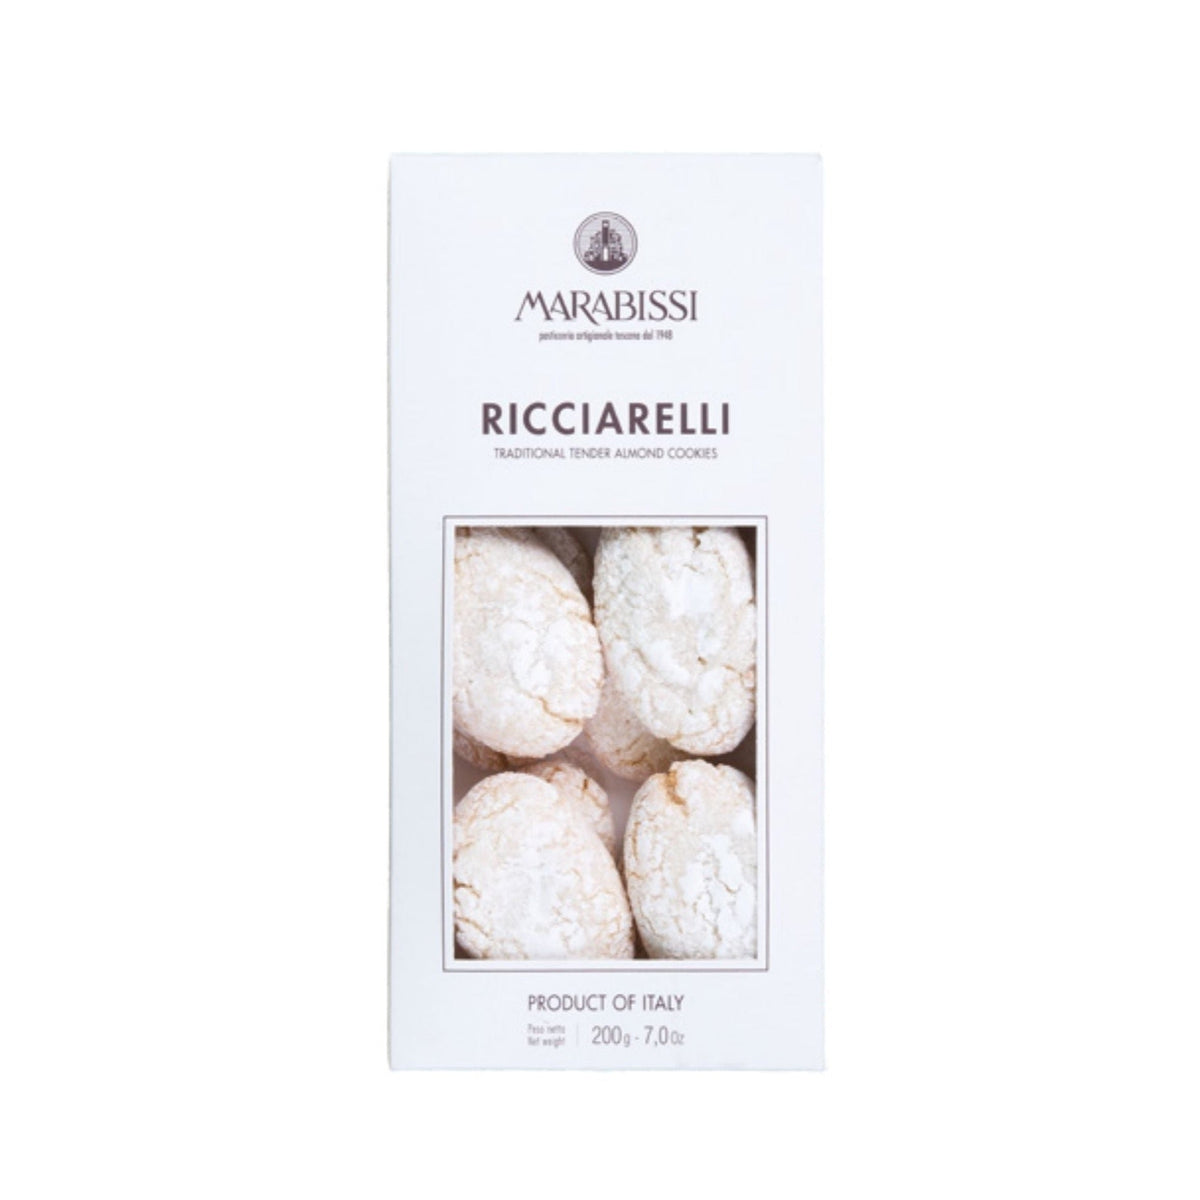 Marabissi Ricciarelli (Box) 200g  | Imported and distributed in the UK by Just Gourmet Foods